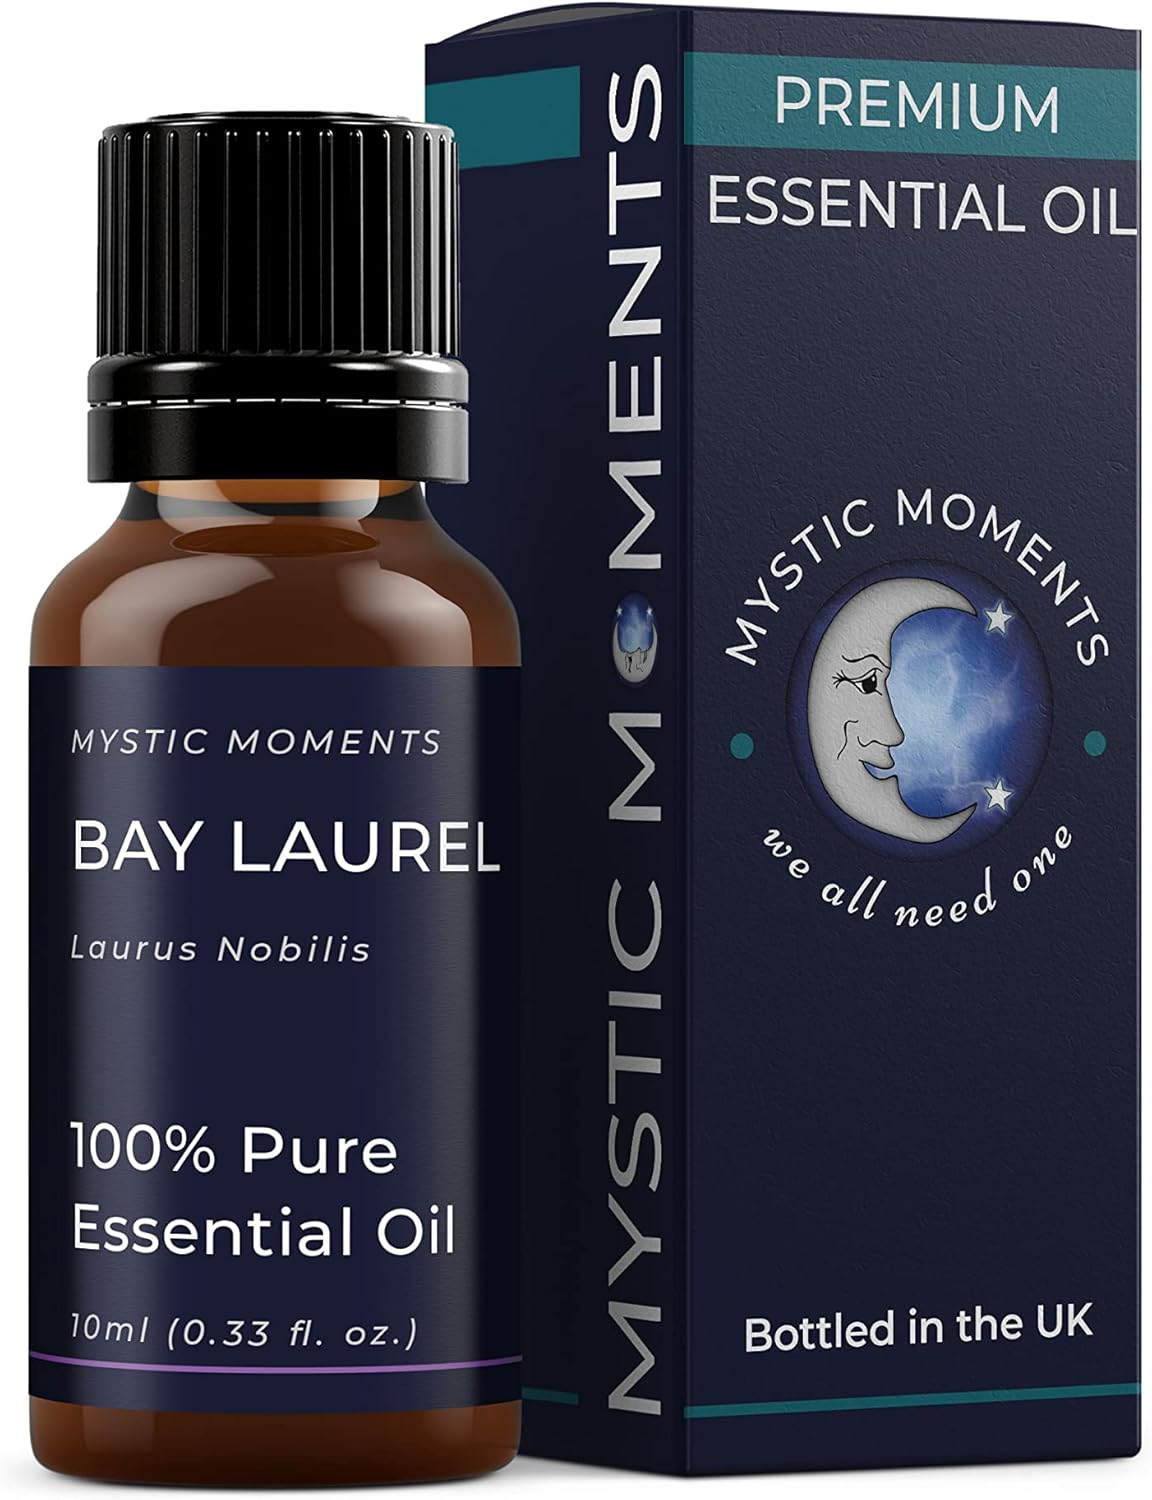 Mystic Moments | Bay Laurel Essential Oil 10ml - Pure & Natural oil for Diffusers, Aromatherapy & Massage Blends Vegan GMO Free